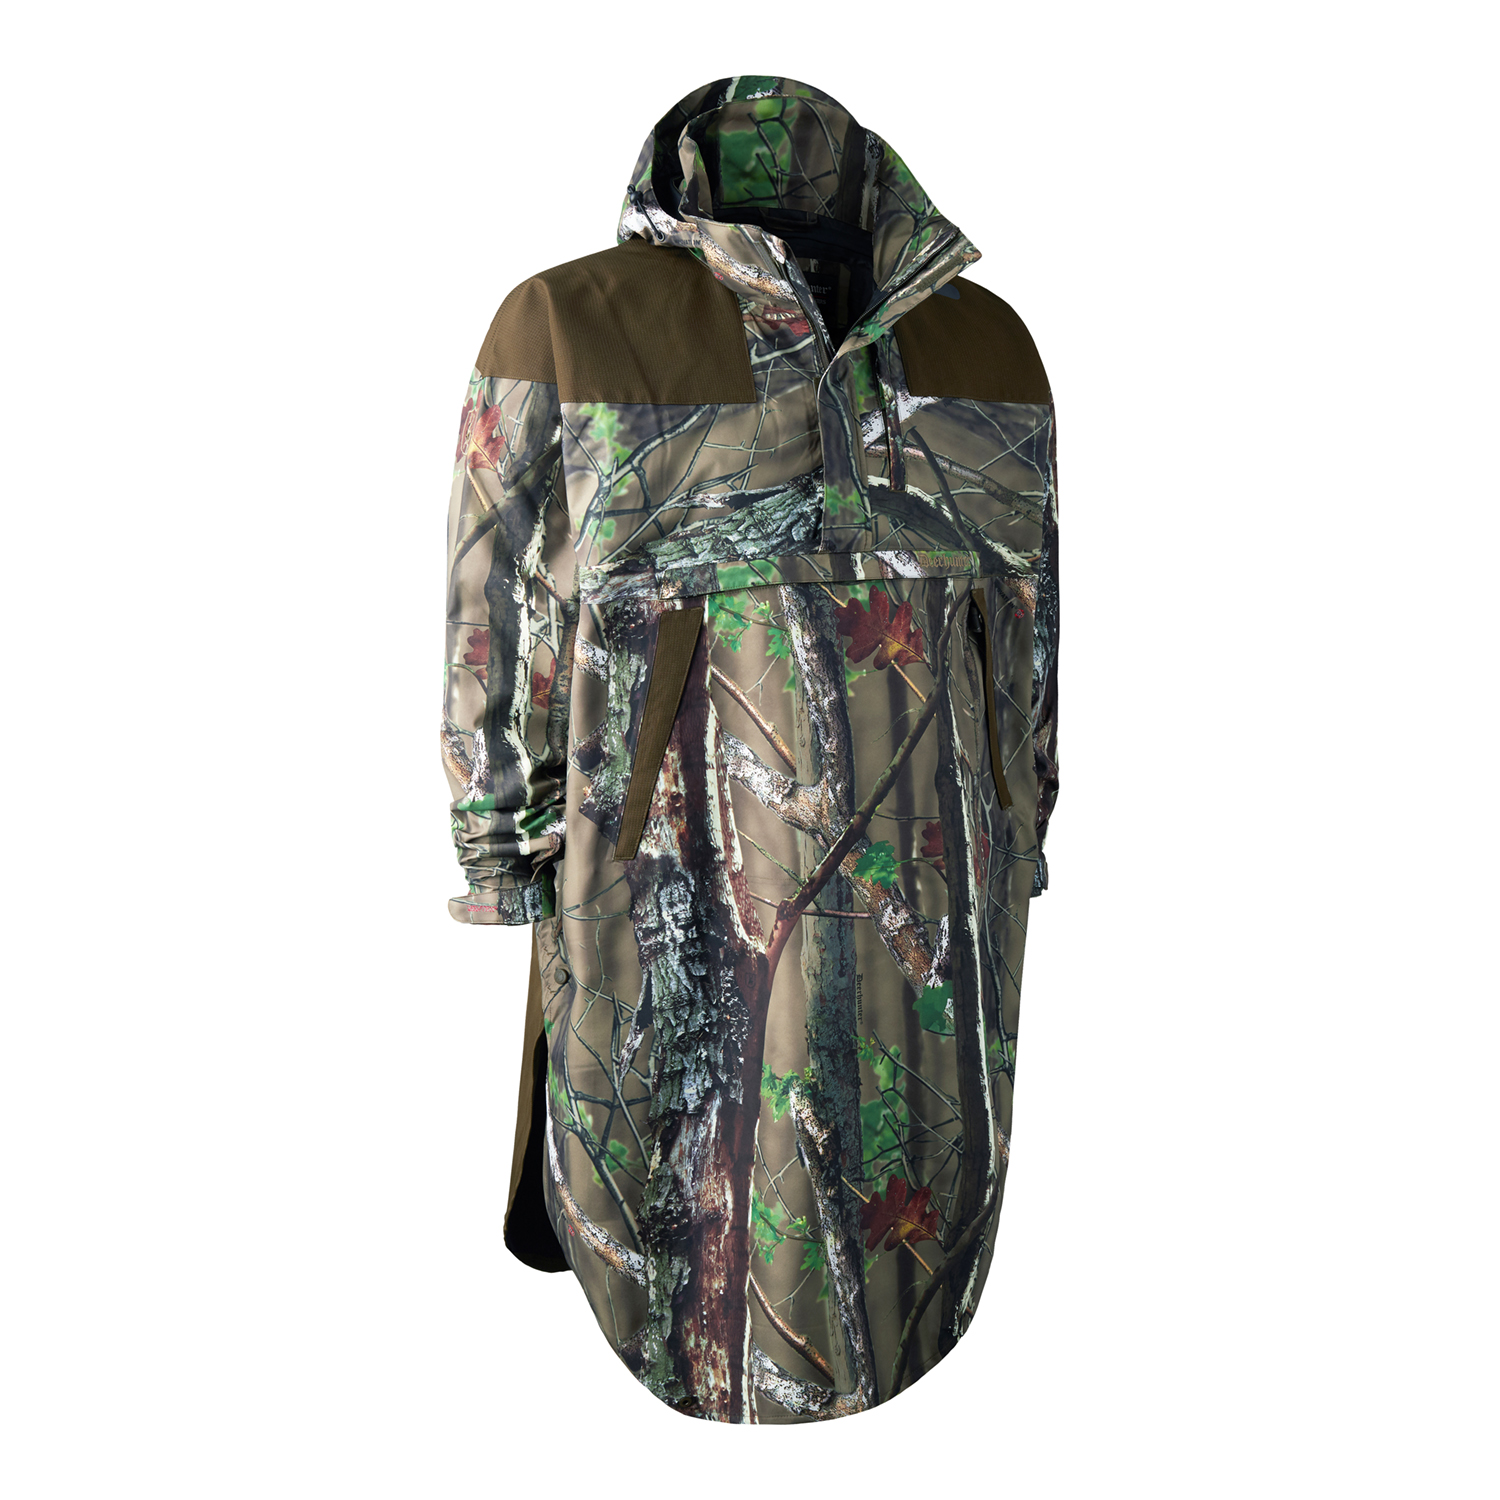 Track regn anorak - Innovation GH Camouflage - M thumbnail